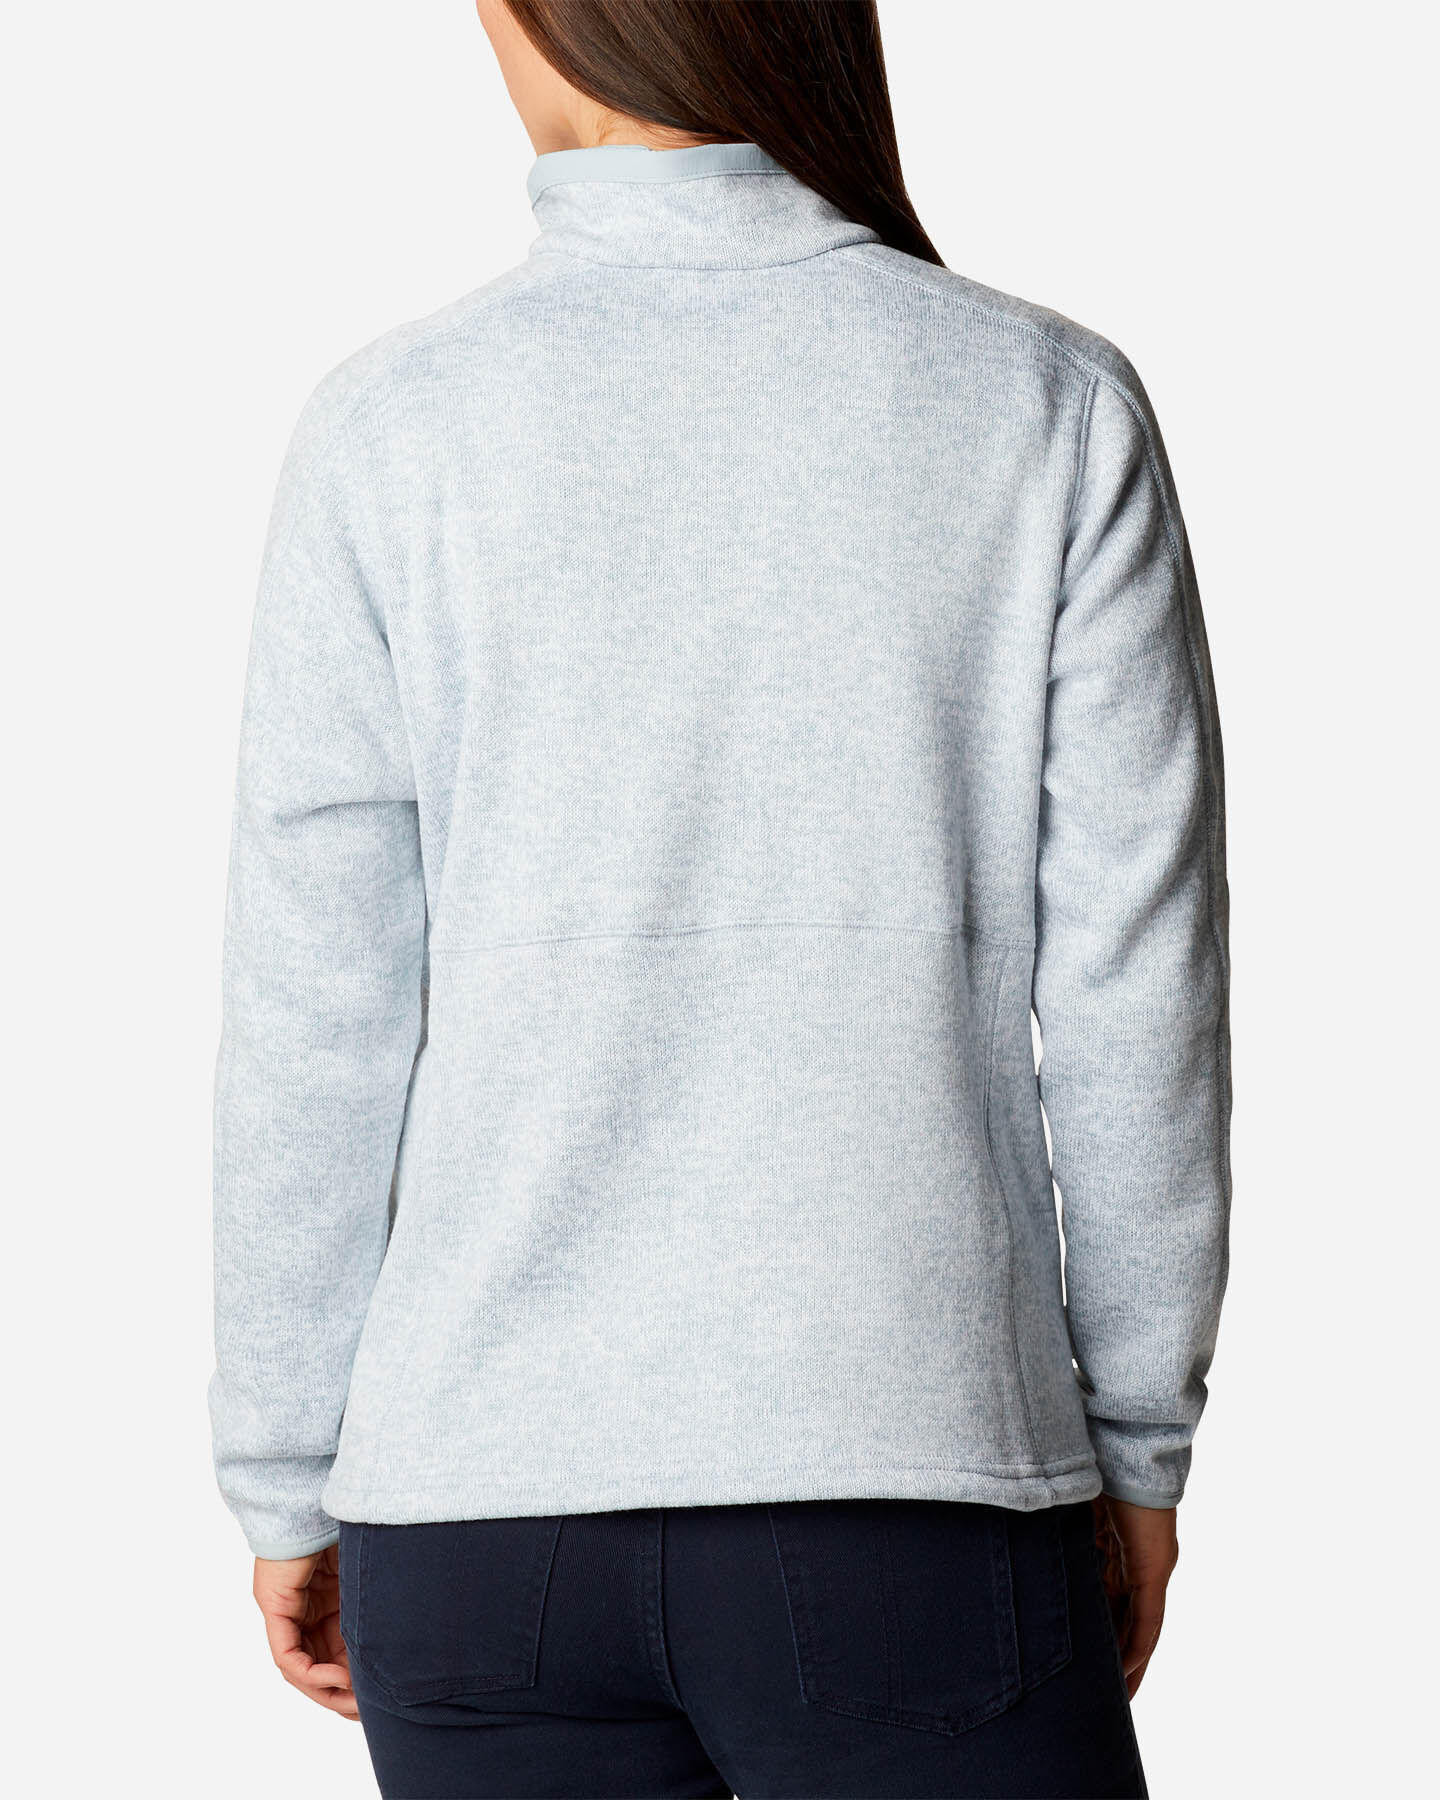  Pile COLUMBIA SWEATER WEATHER W S5361788|031|XS scatto 3